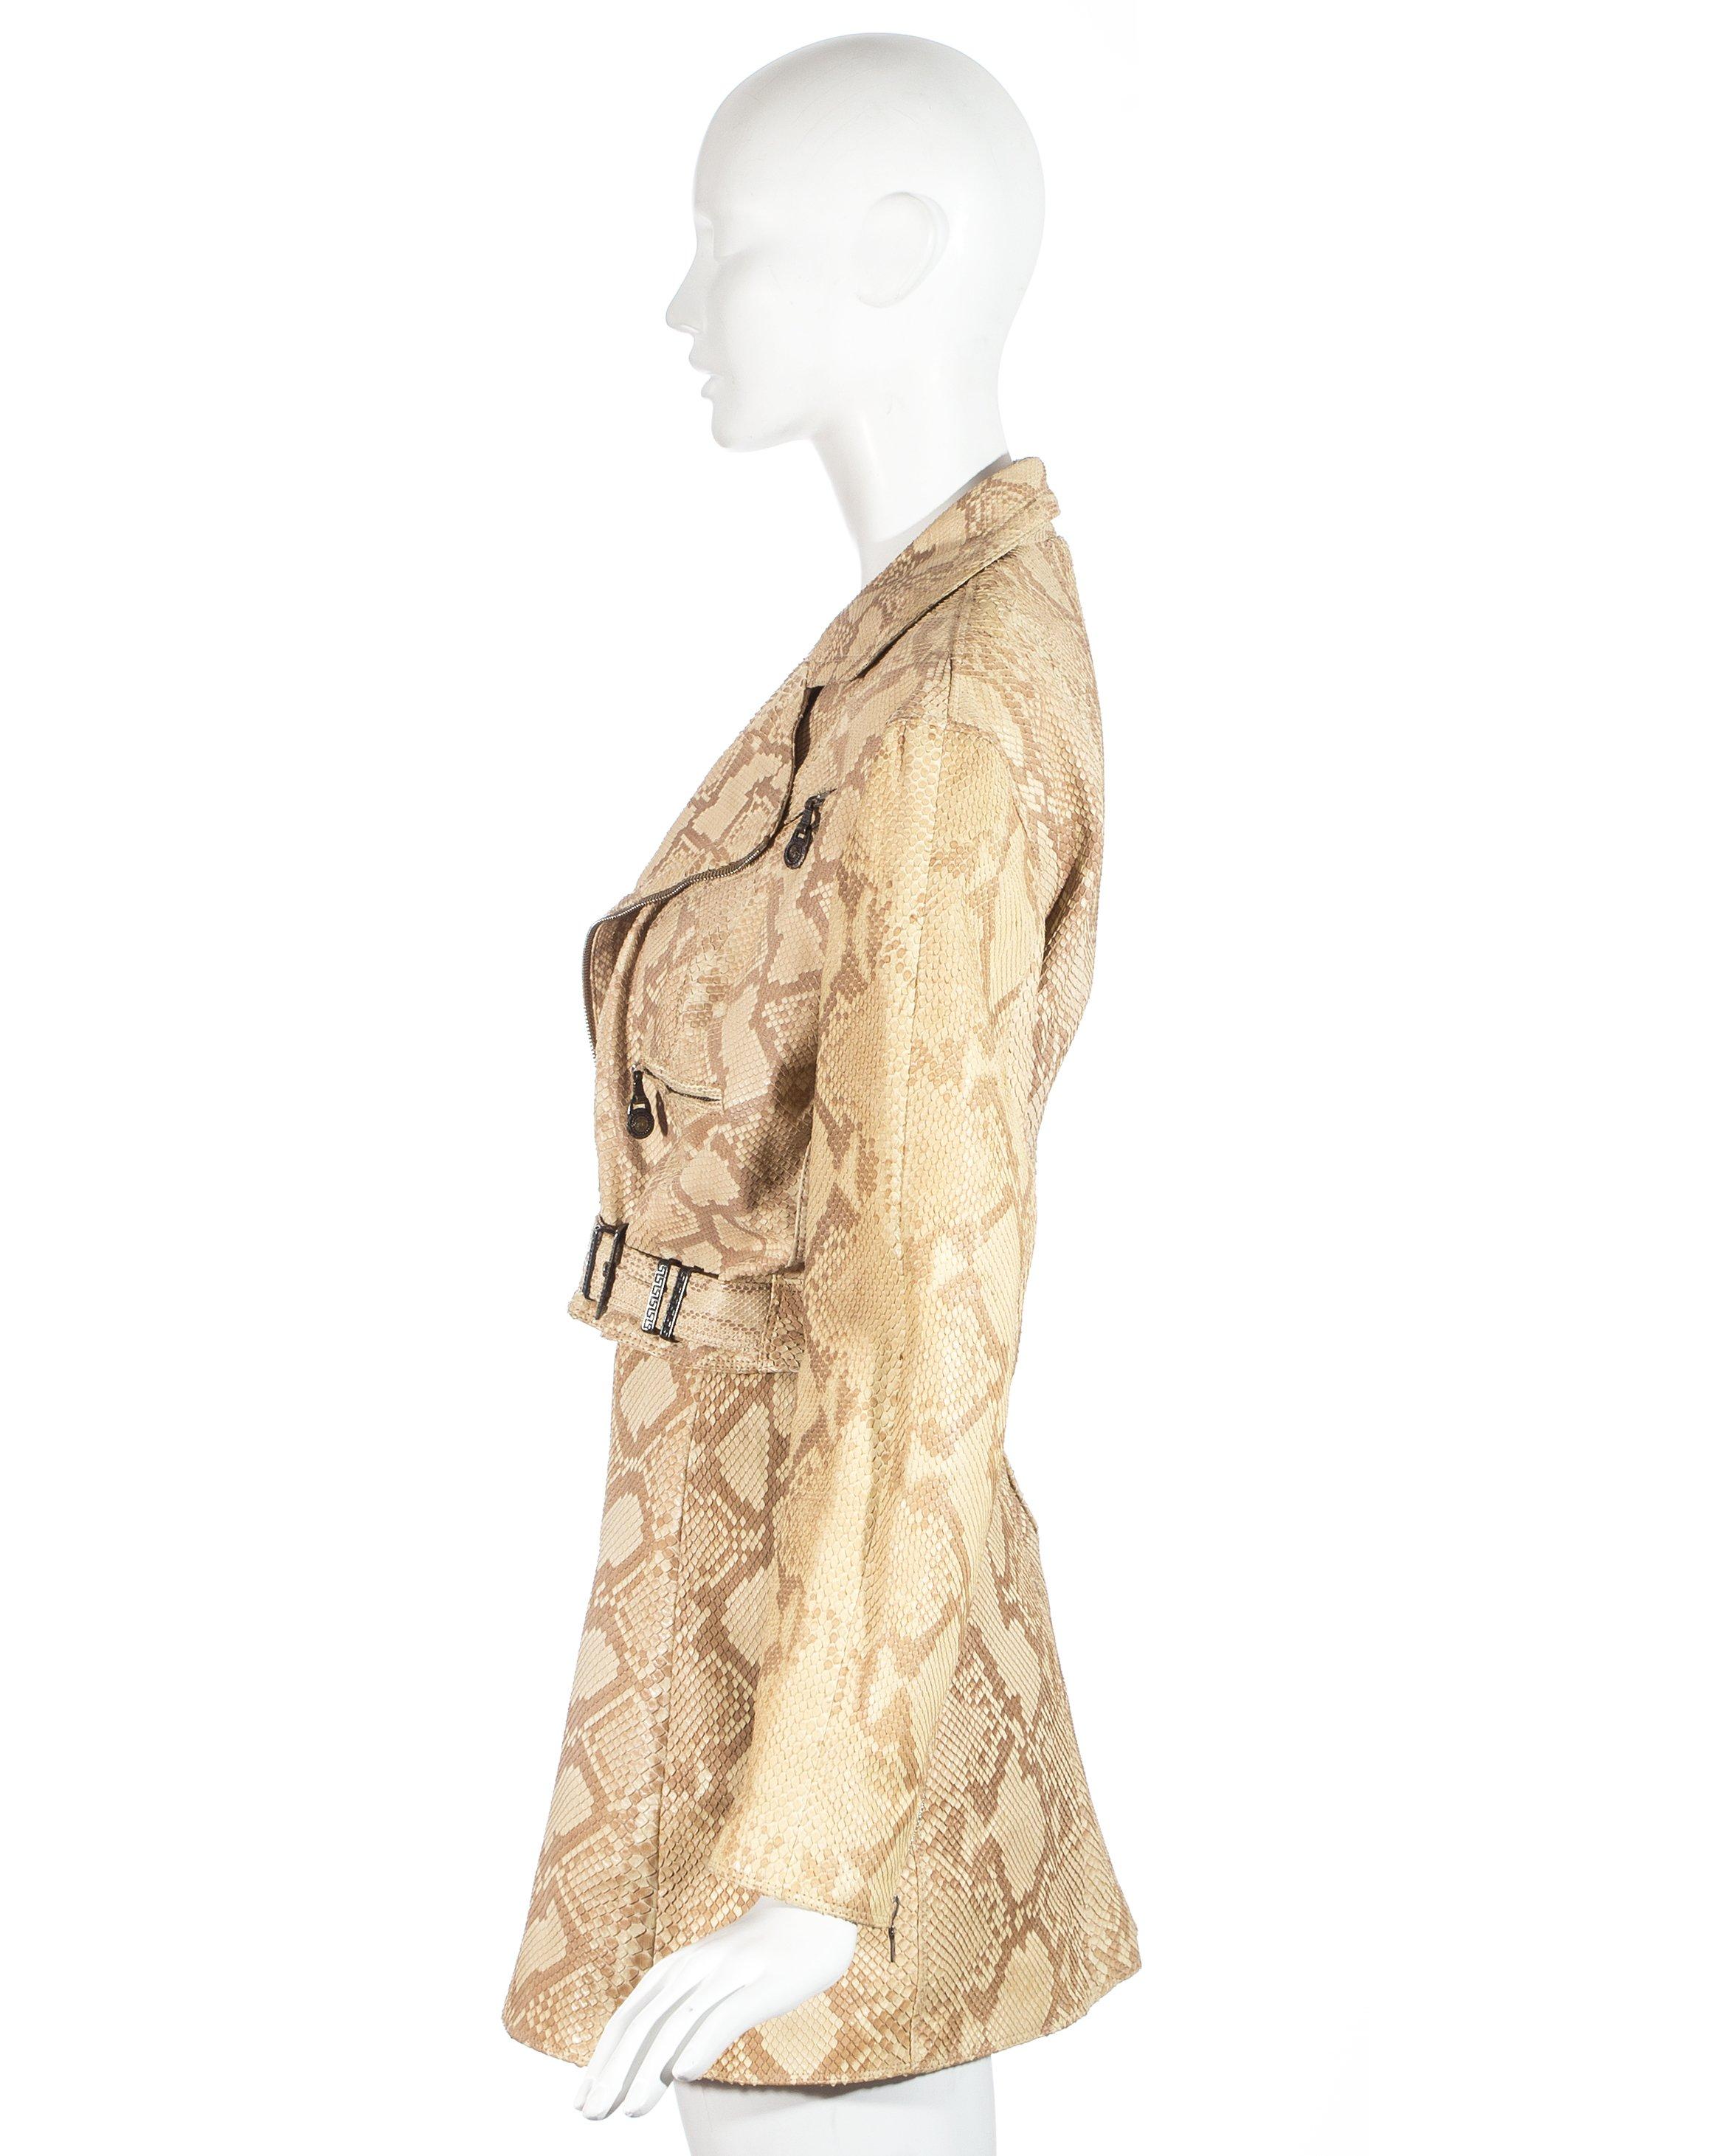 Gianni Versace Snakeskin leather biker jacket and mini skirt set, fw 1994 In Excellent Condition For Sale In London, GB